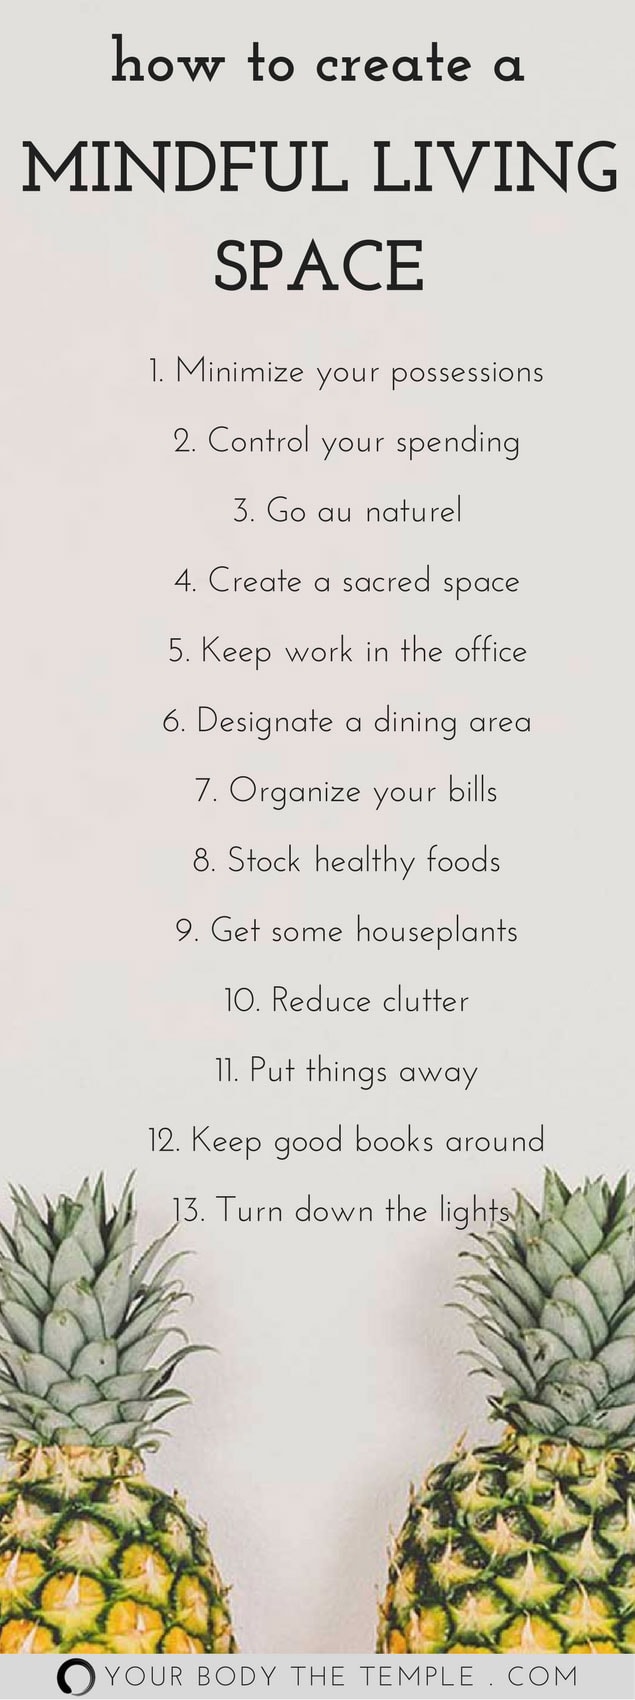 mindful living space